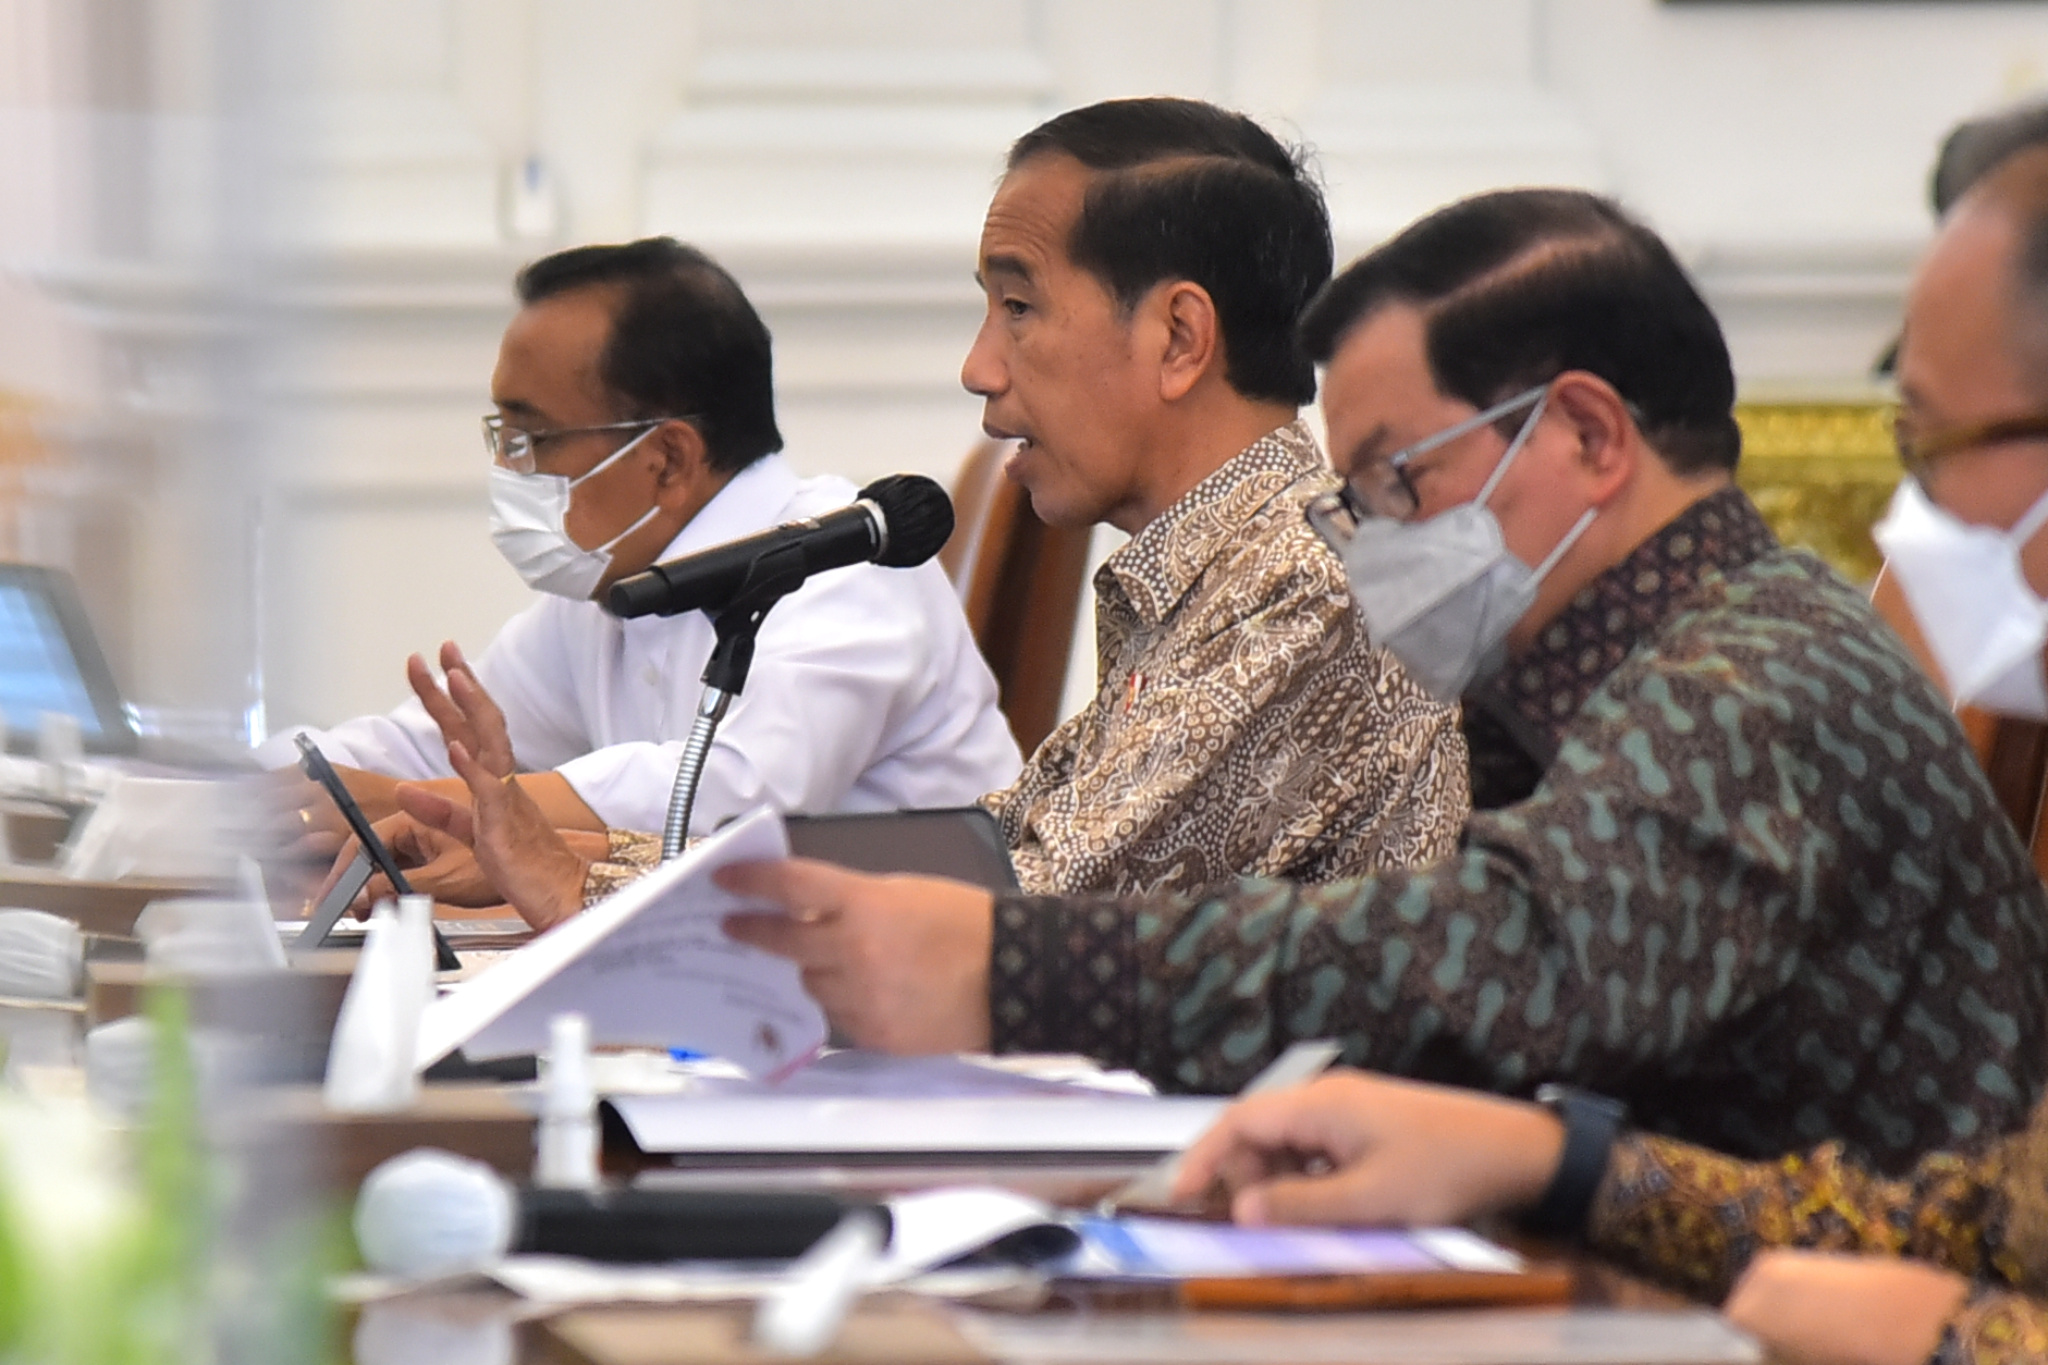 President Jokowi hosts a Limited Meeting on National Sugar Policy at Merdeka Palace in Jakarta (07/20) (Photo by: PR of Cabinet Secretariat/Agung)